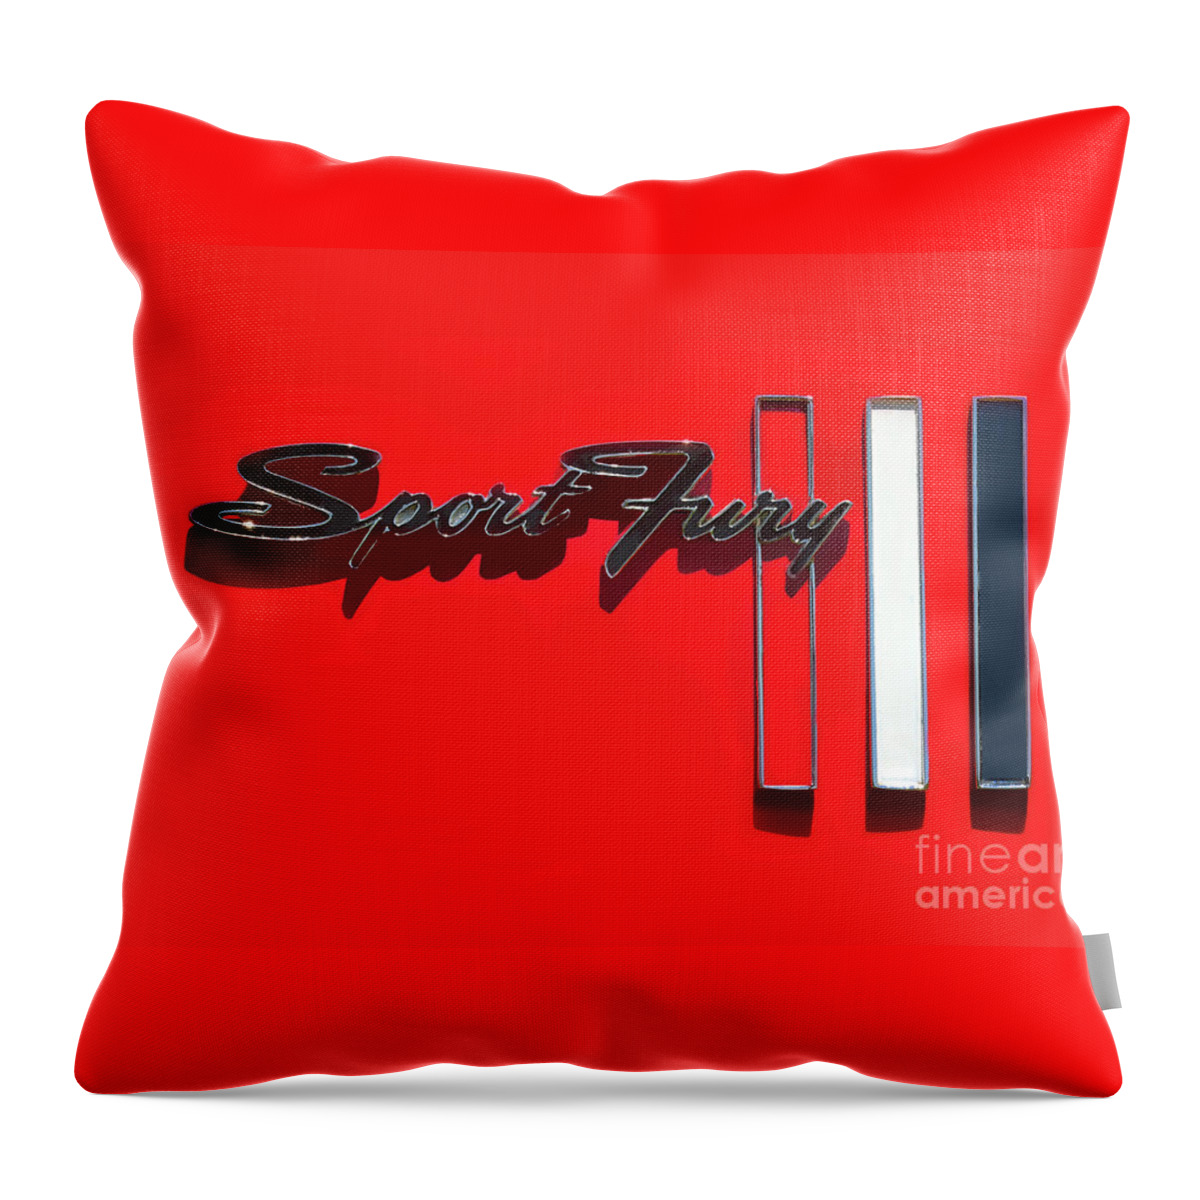 Plymouth Sport Fury Throw Pillow featuring the photograph Plymouth Sport Fury by Arttography LLC